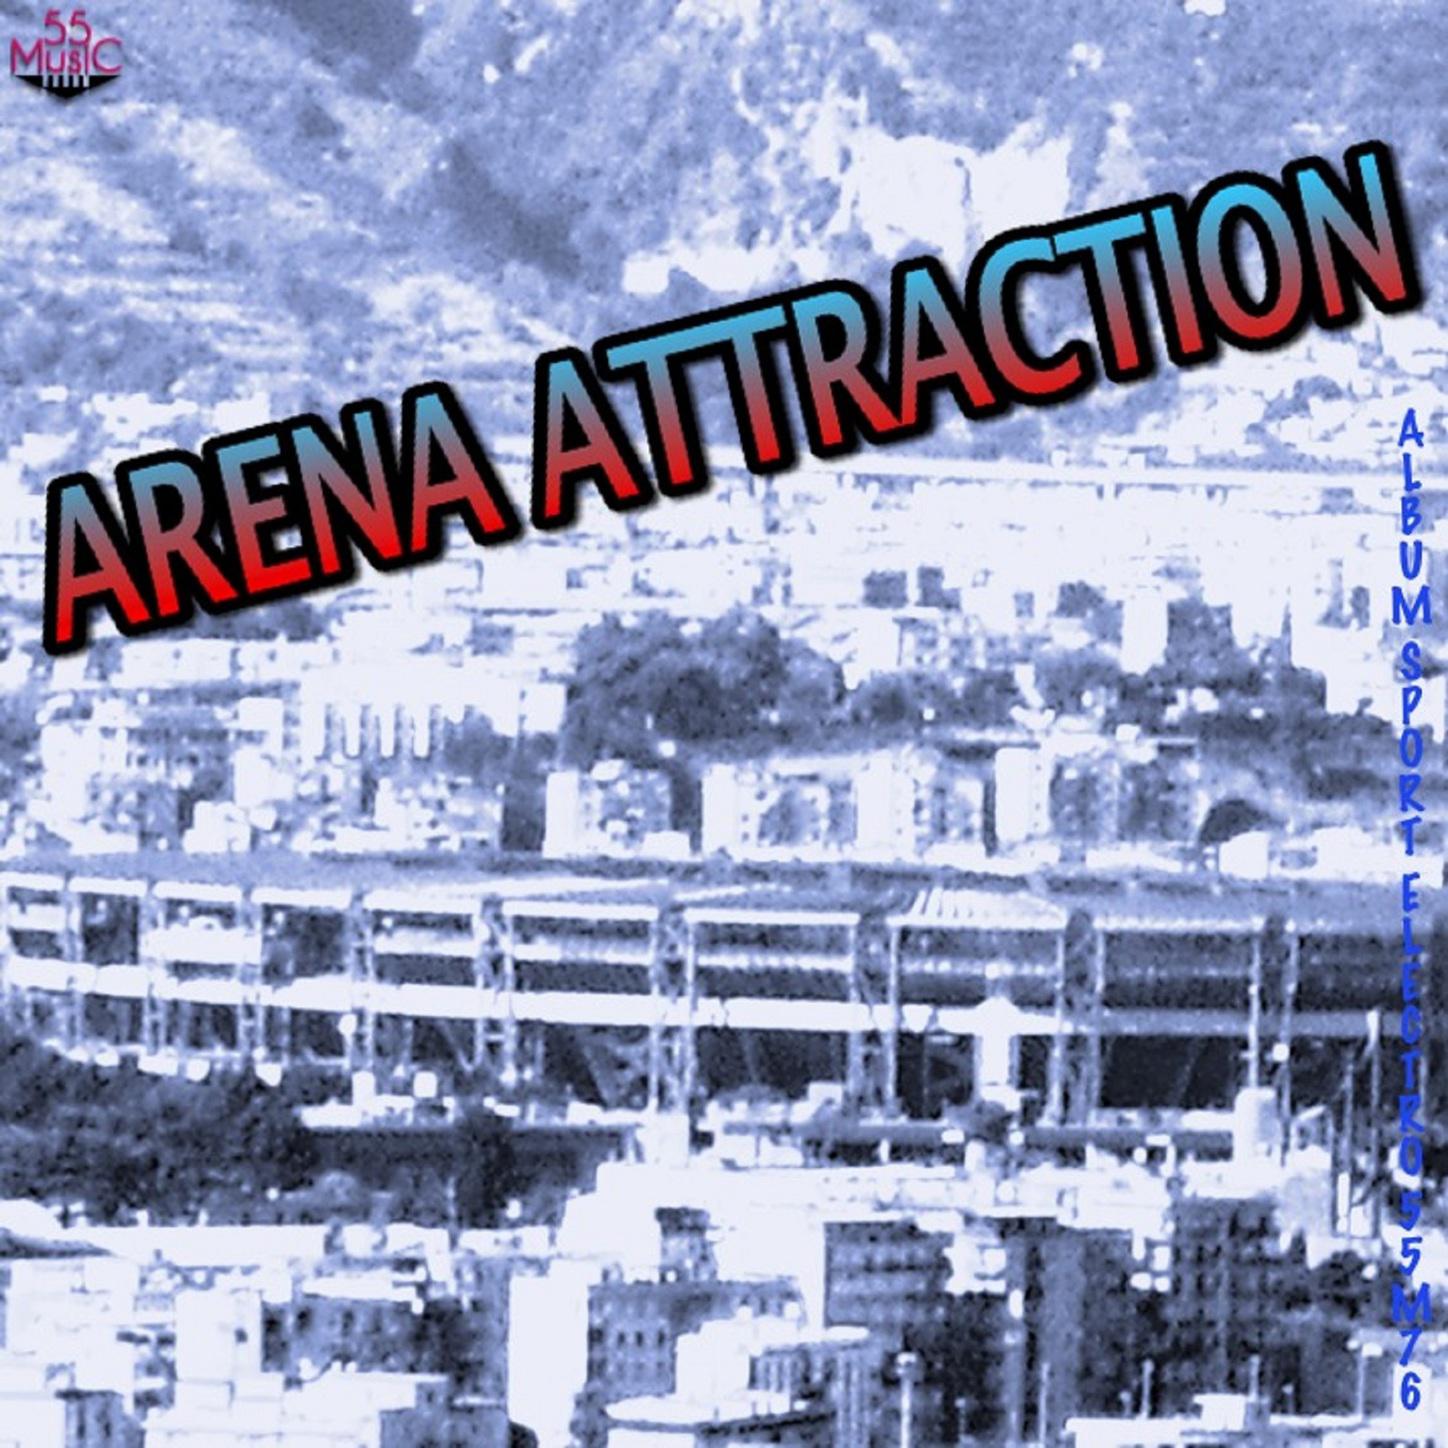 Arena Attraction